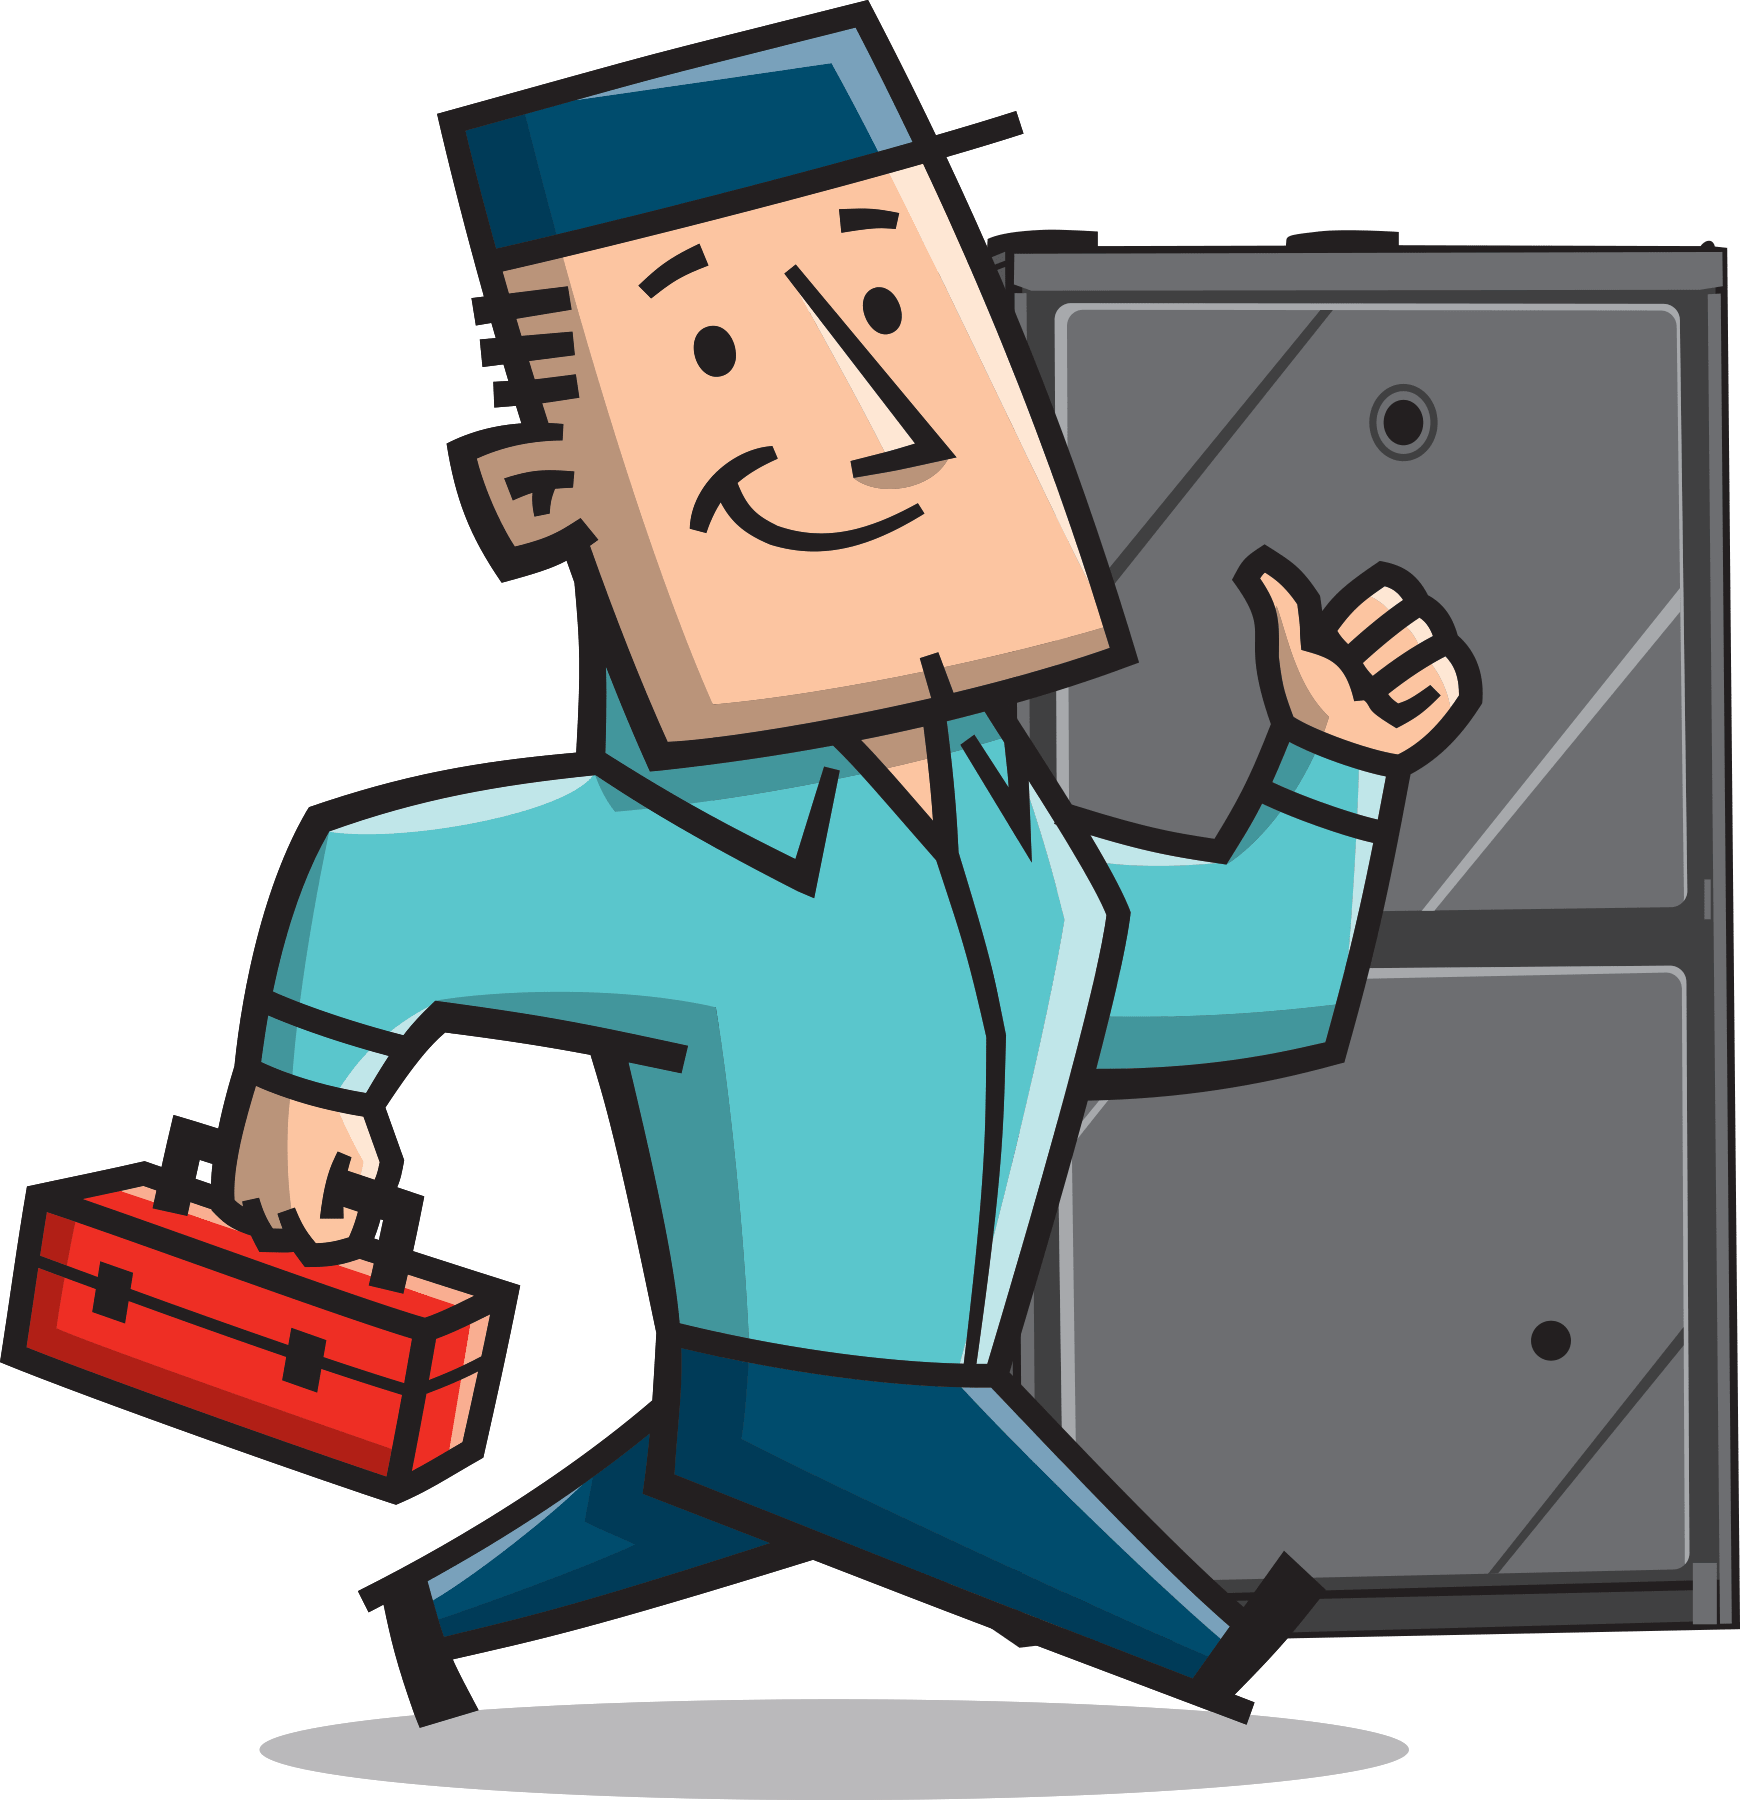 Let us handle your Furnace repair in Plainfield IL.